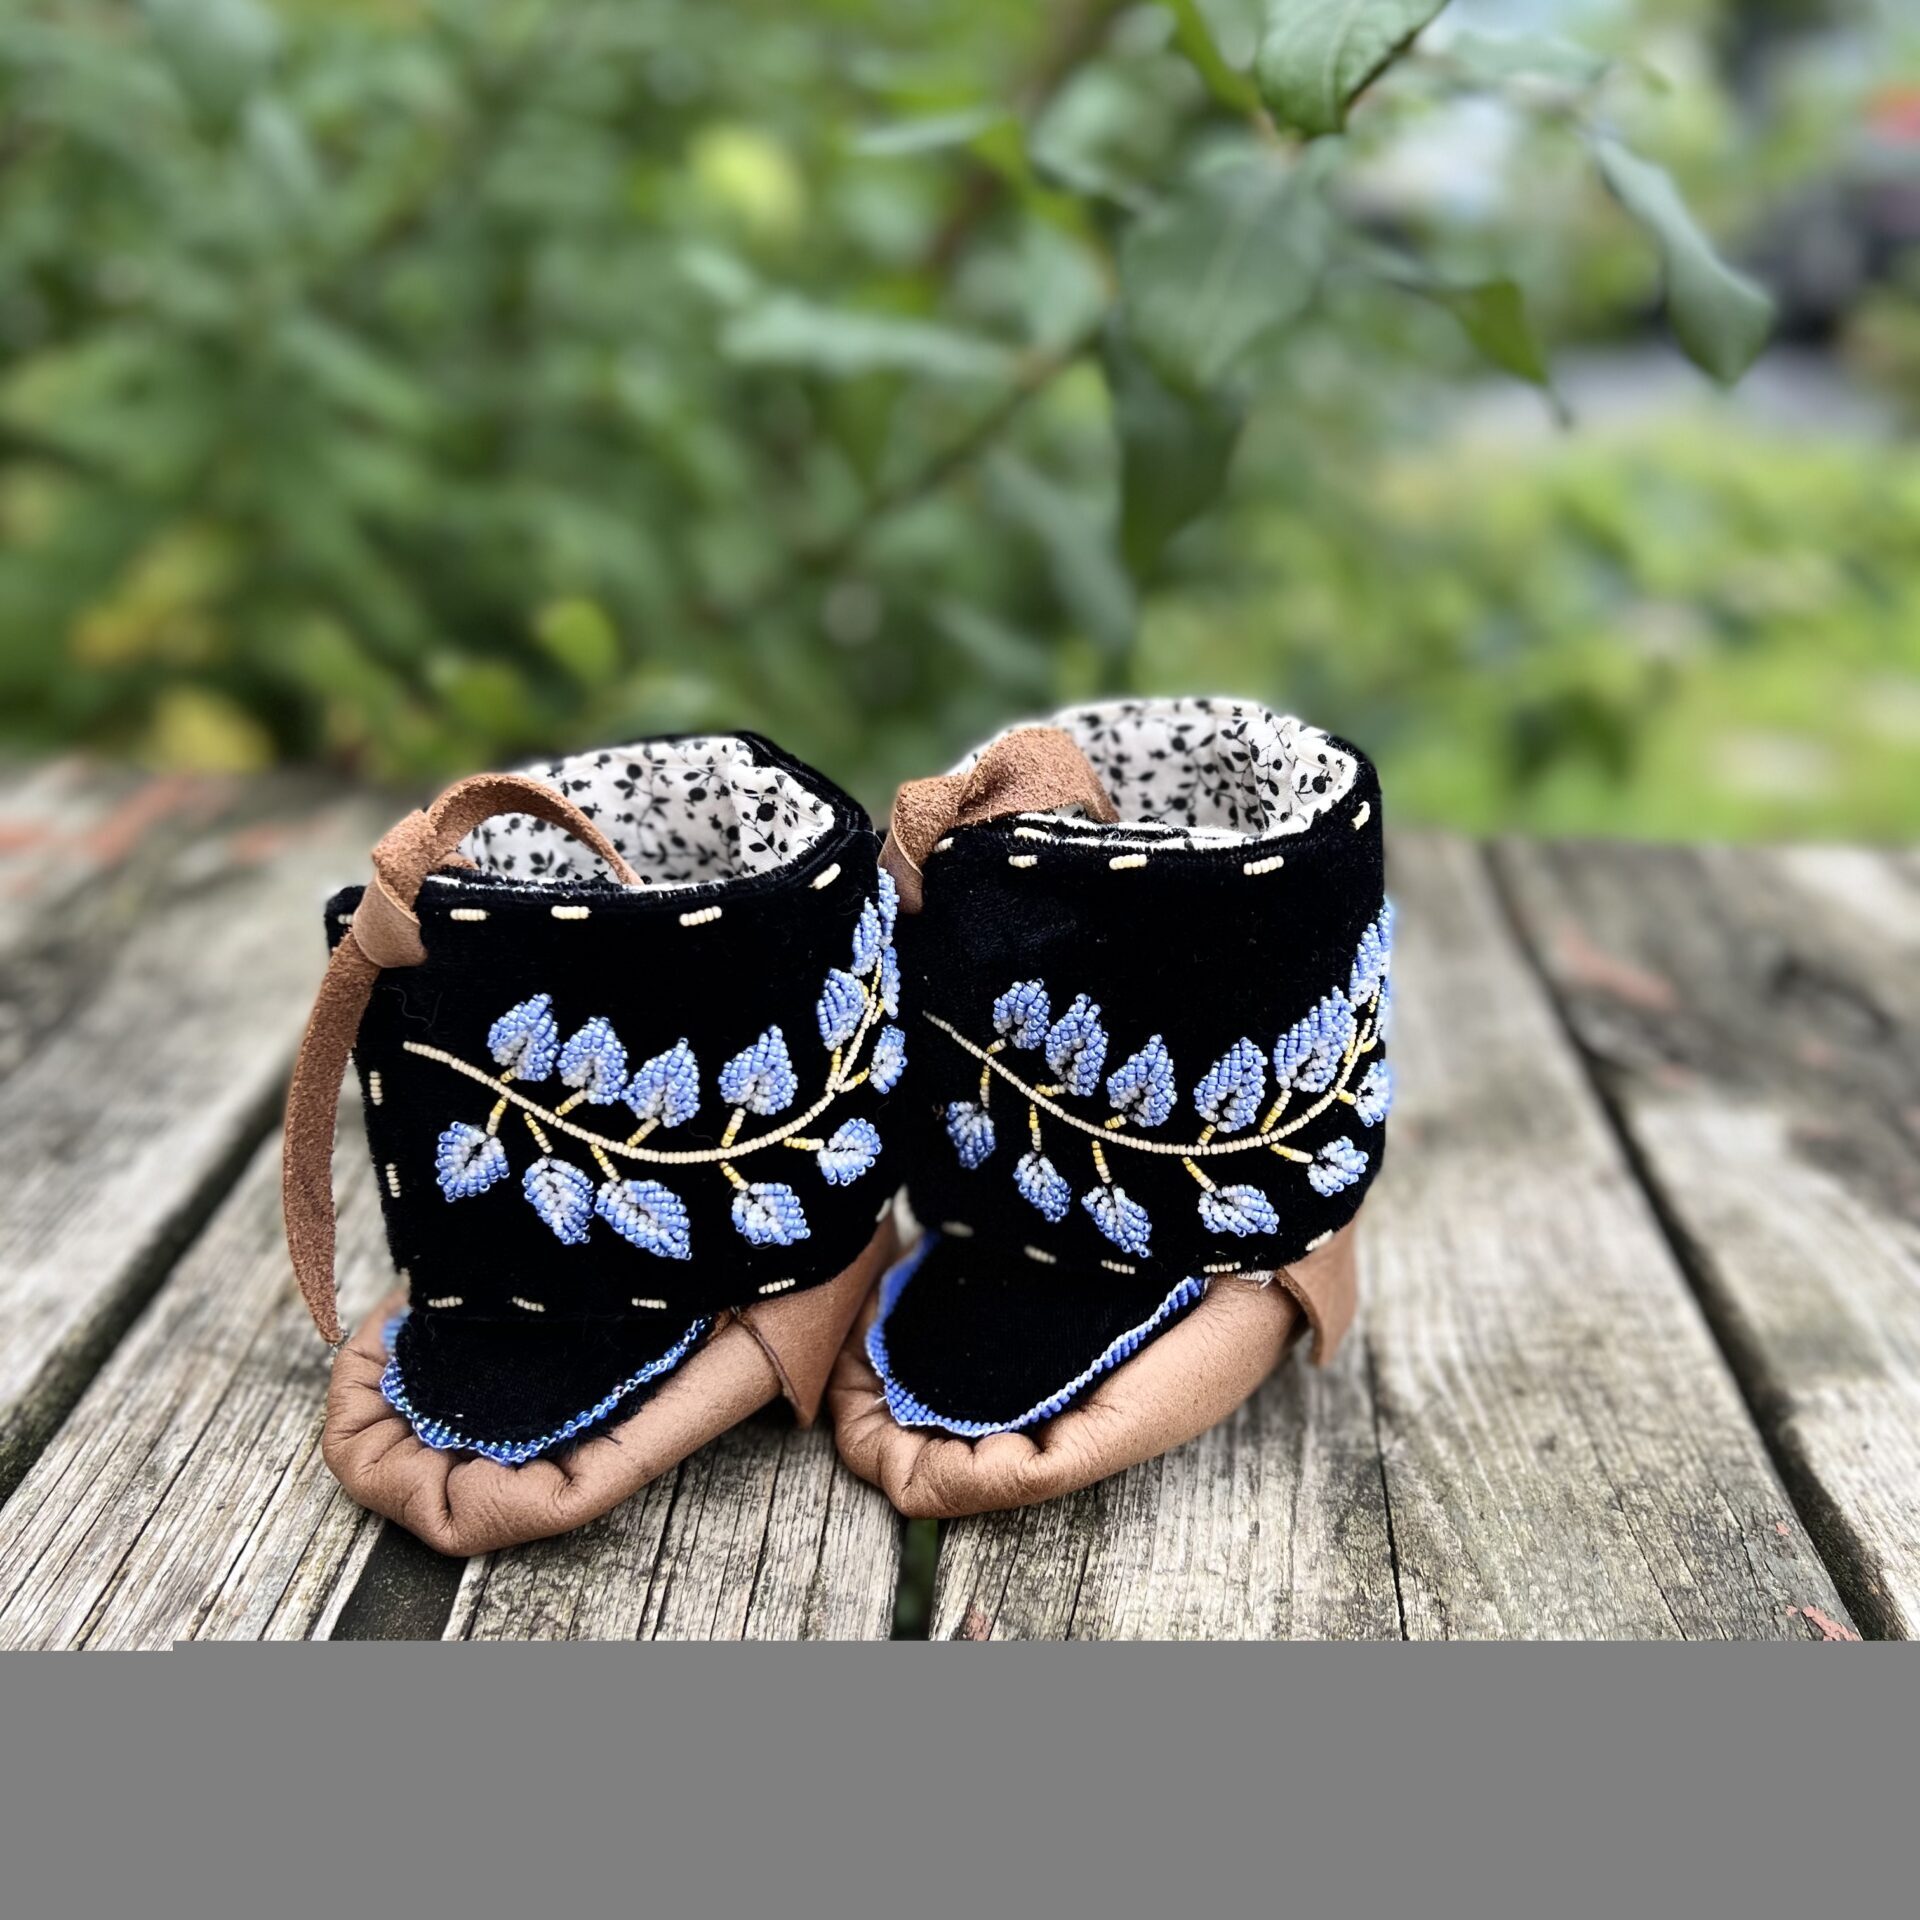 Ashley Rain Thompson, beadwork, leatherwork, crafts, jewelry, Indigenous Artist, First Nations, Indigenous Arts Collective of Canada, Pass The Feather